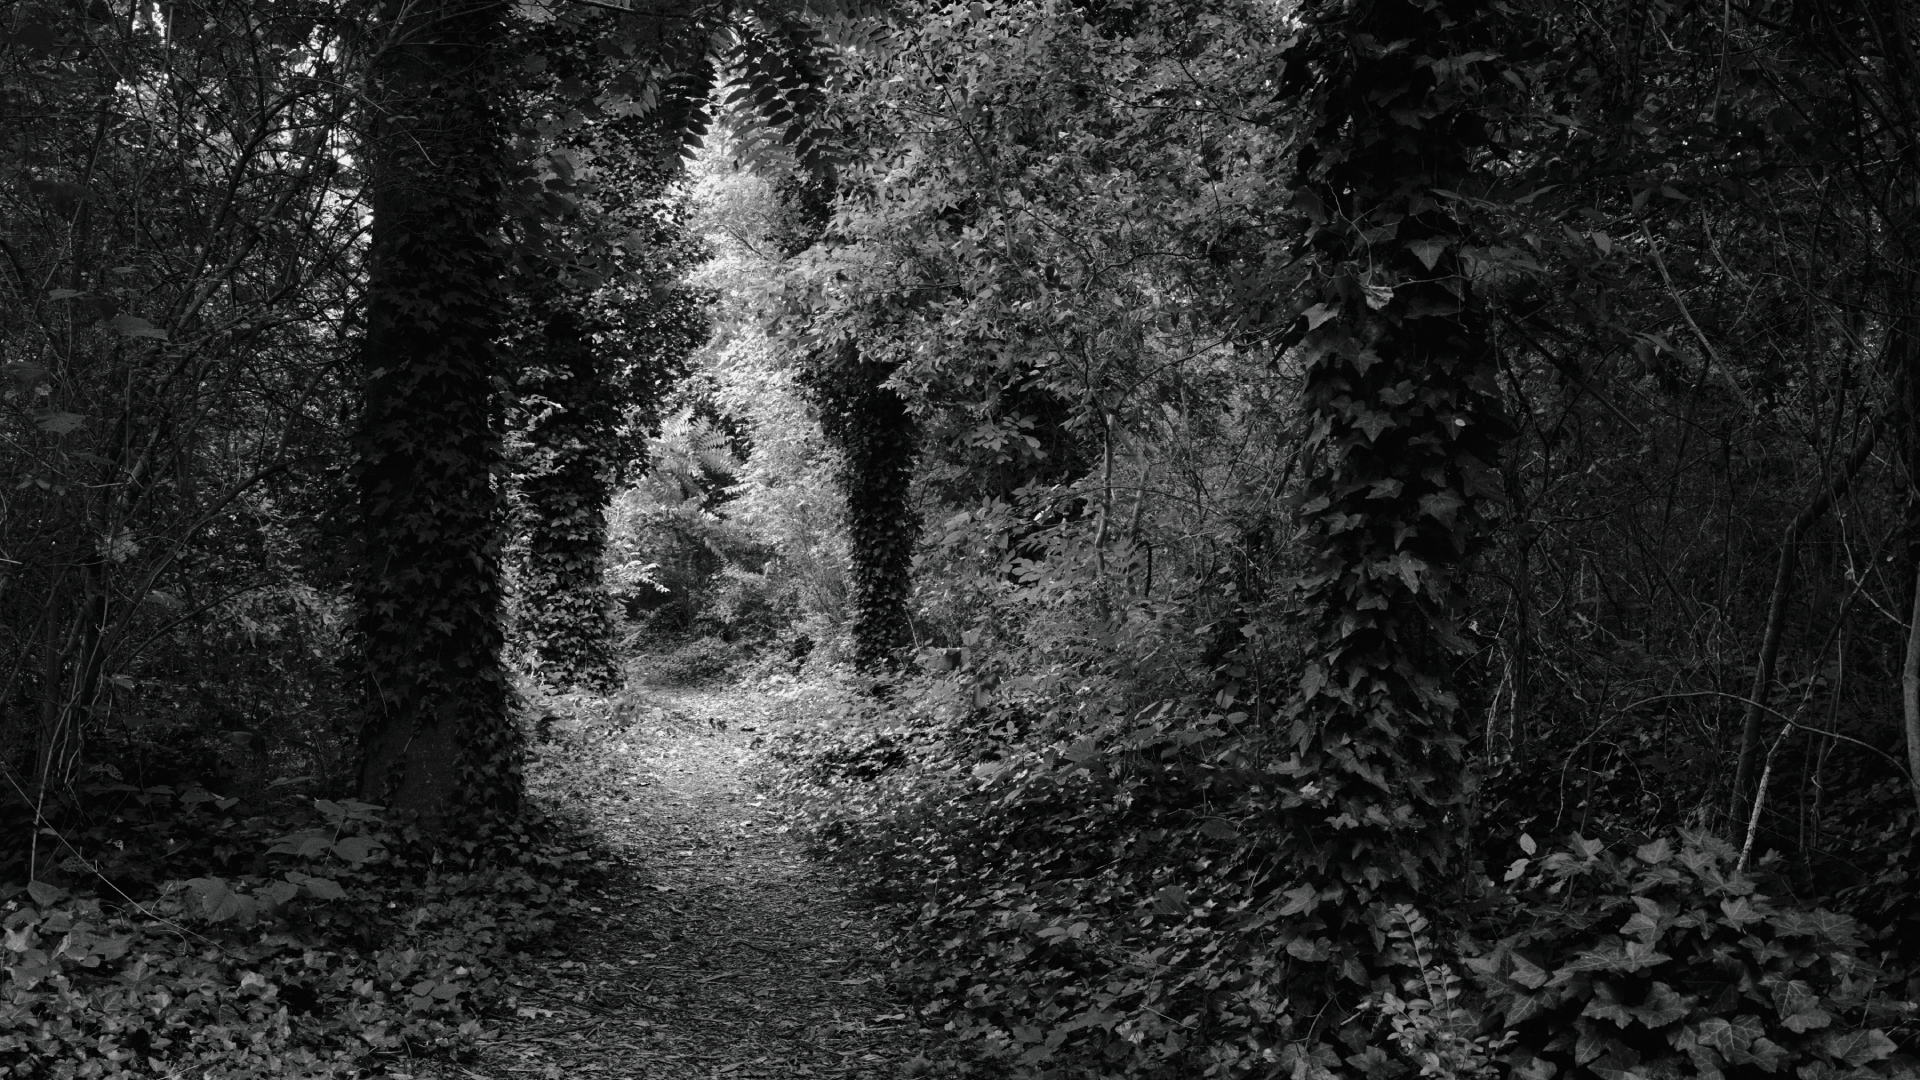 Untitled (Trail and Trees) (detail), 2023, Dawoud Bey (American, born 1953), gelatin silver print, 48 x 59 in. Virginia Museum of Fine Arts, Gift of Mrs. Alfred duPont, by exchange, 2020.168.1. Image © Dawoud Bey